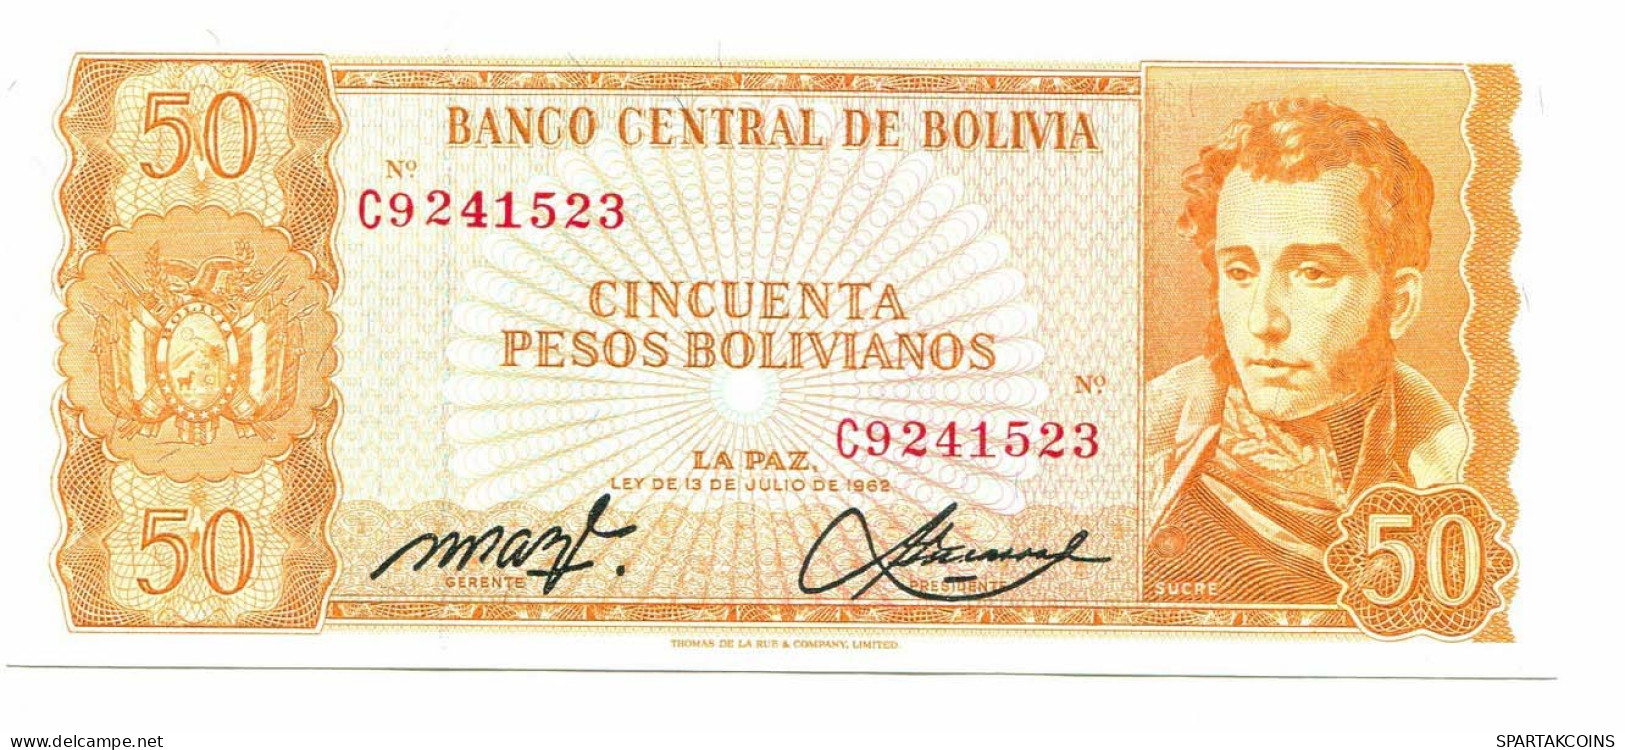 BOLIVIA 50 PESOS BOLIVIANOS 1962 AUNC Paper Money Banknote #P10799.4 - [11] Local Banknote Issues